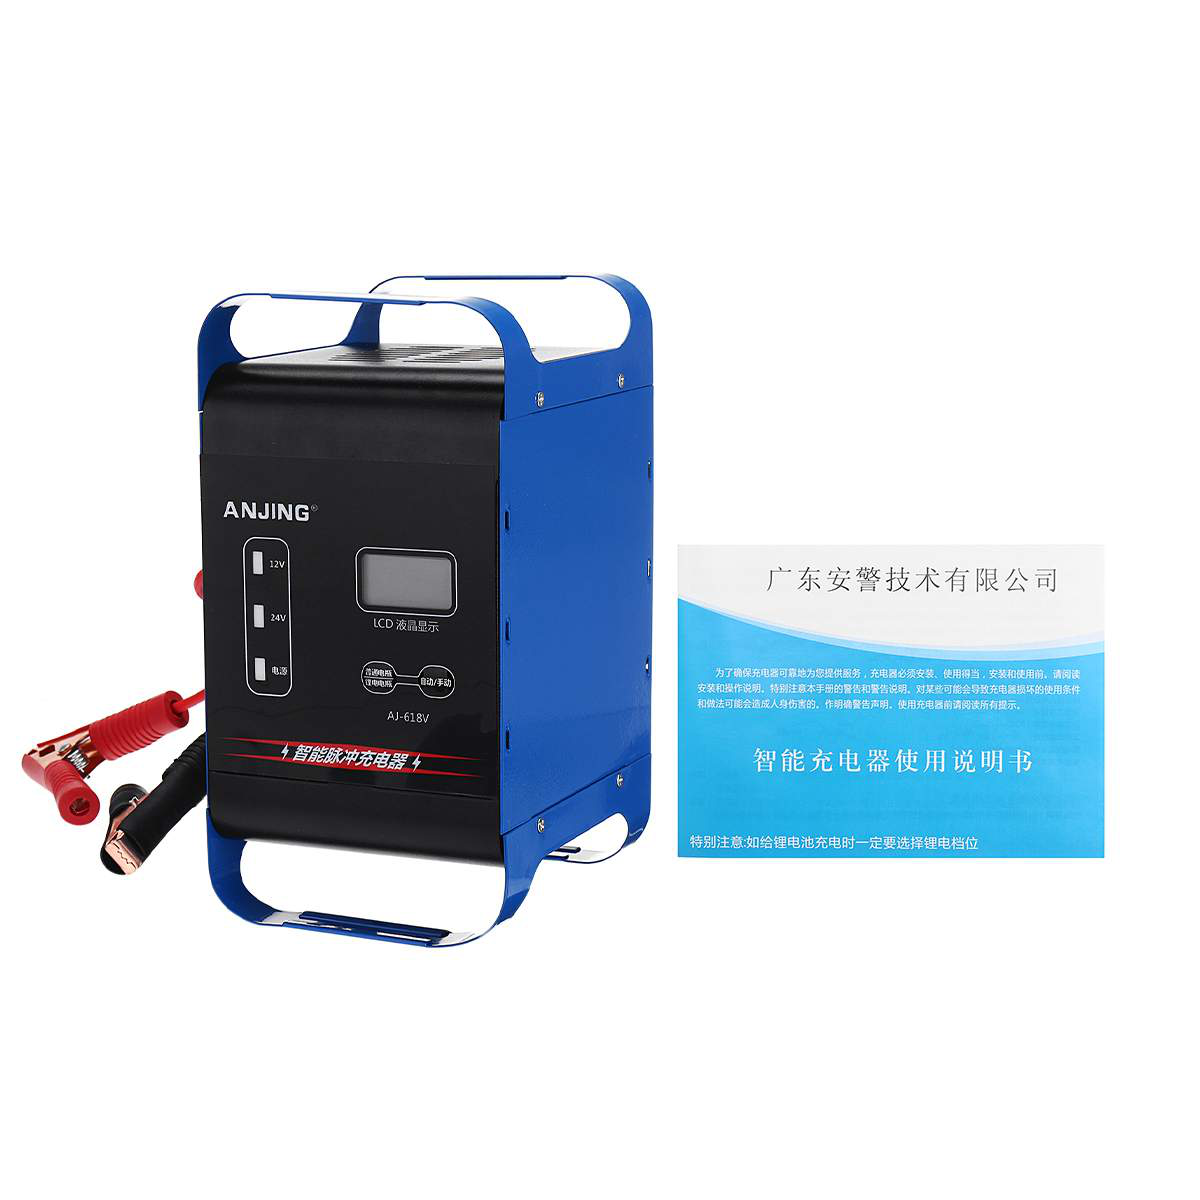 ANJING 12V/24V 400W Automatic Battery Charger Power Pulse Repair Wet Dry Lead Acid Batteries Digital LCD Display for Car Motorcycle - Auto GoShop